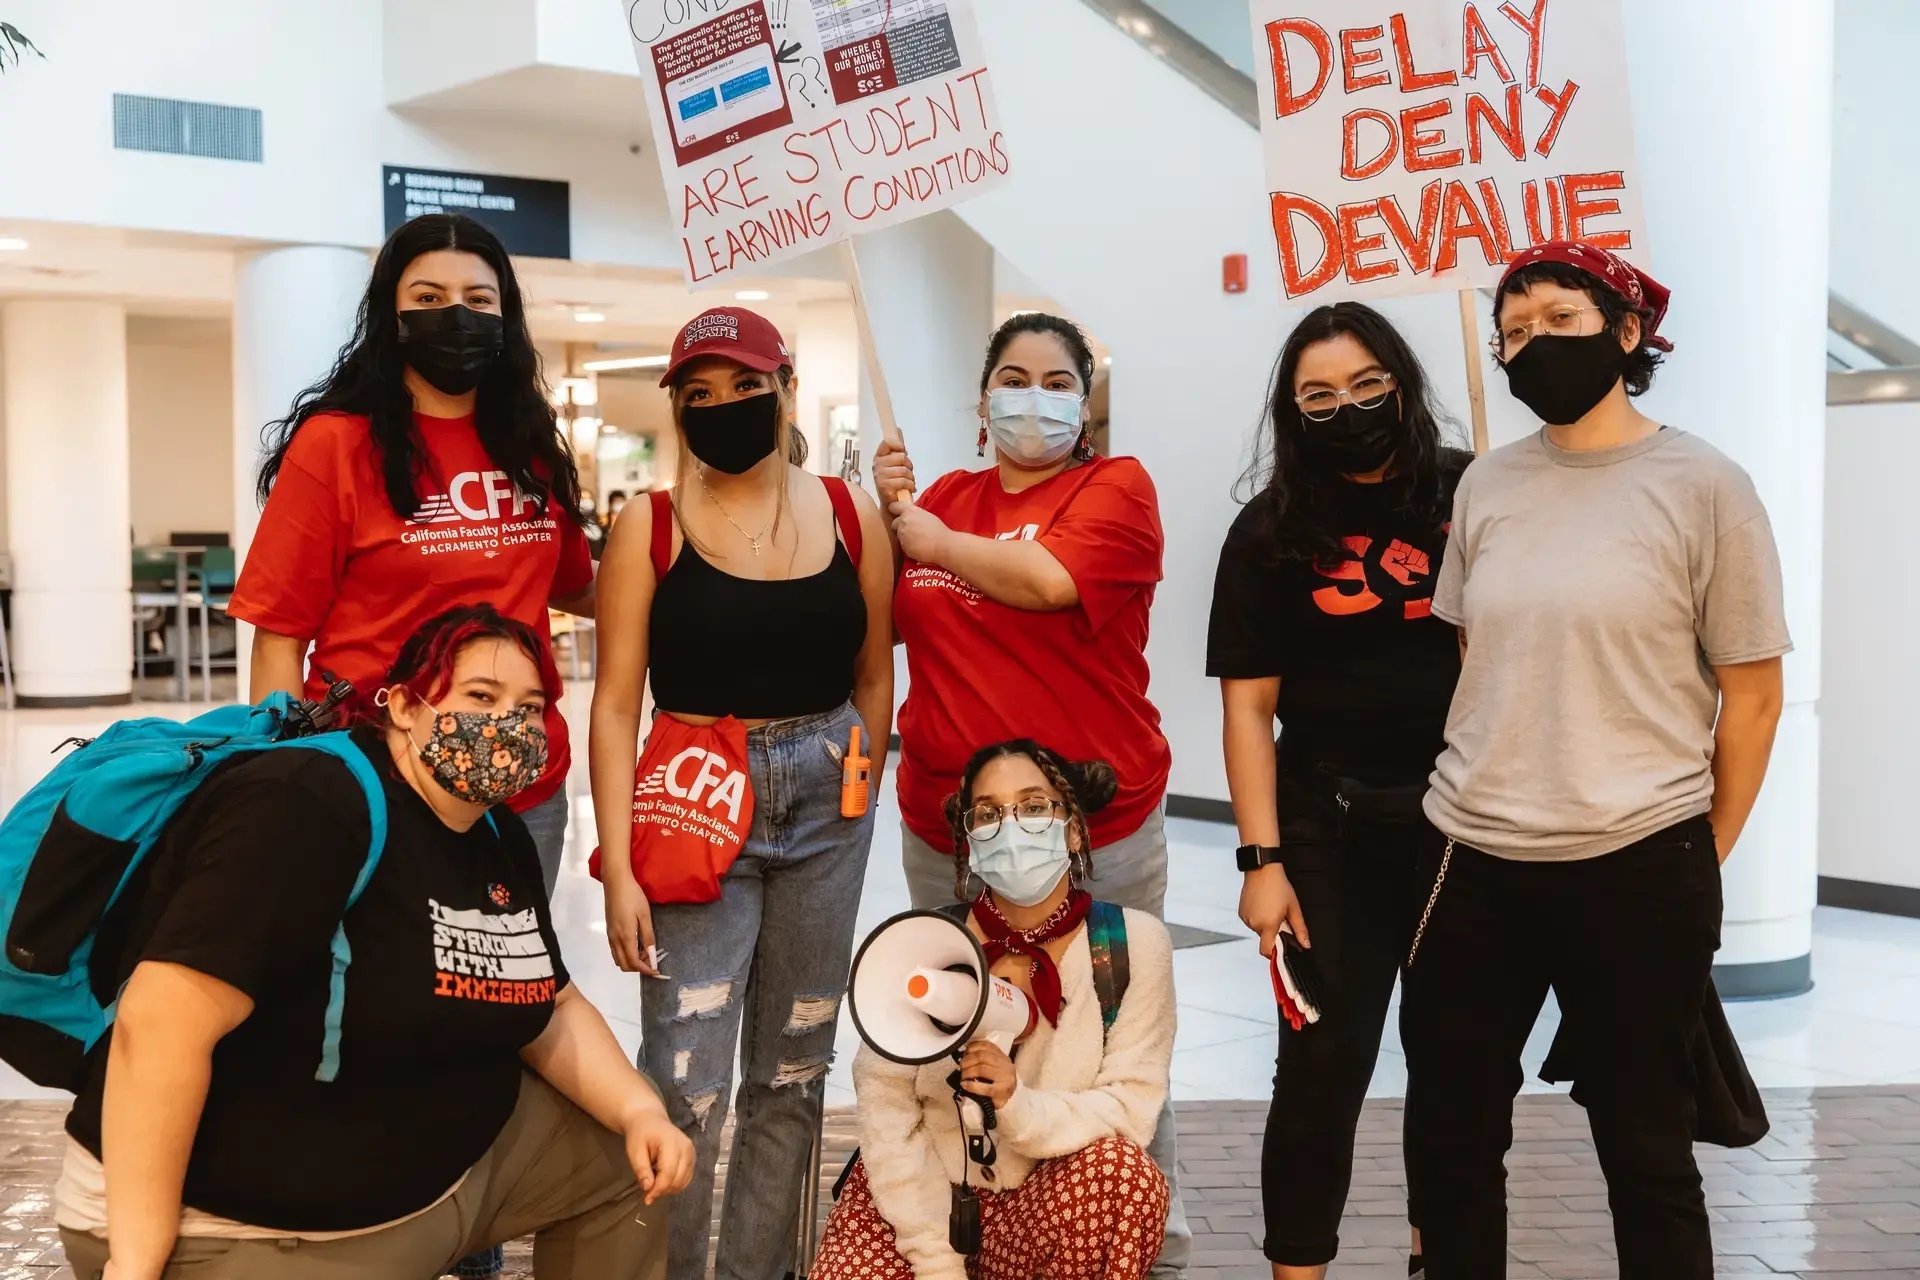 A group of people wearing masks and holding signs